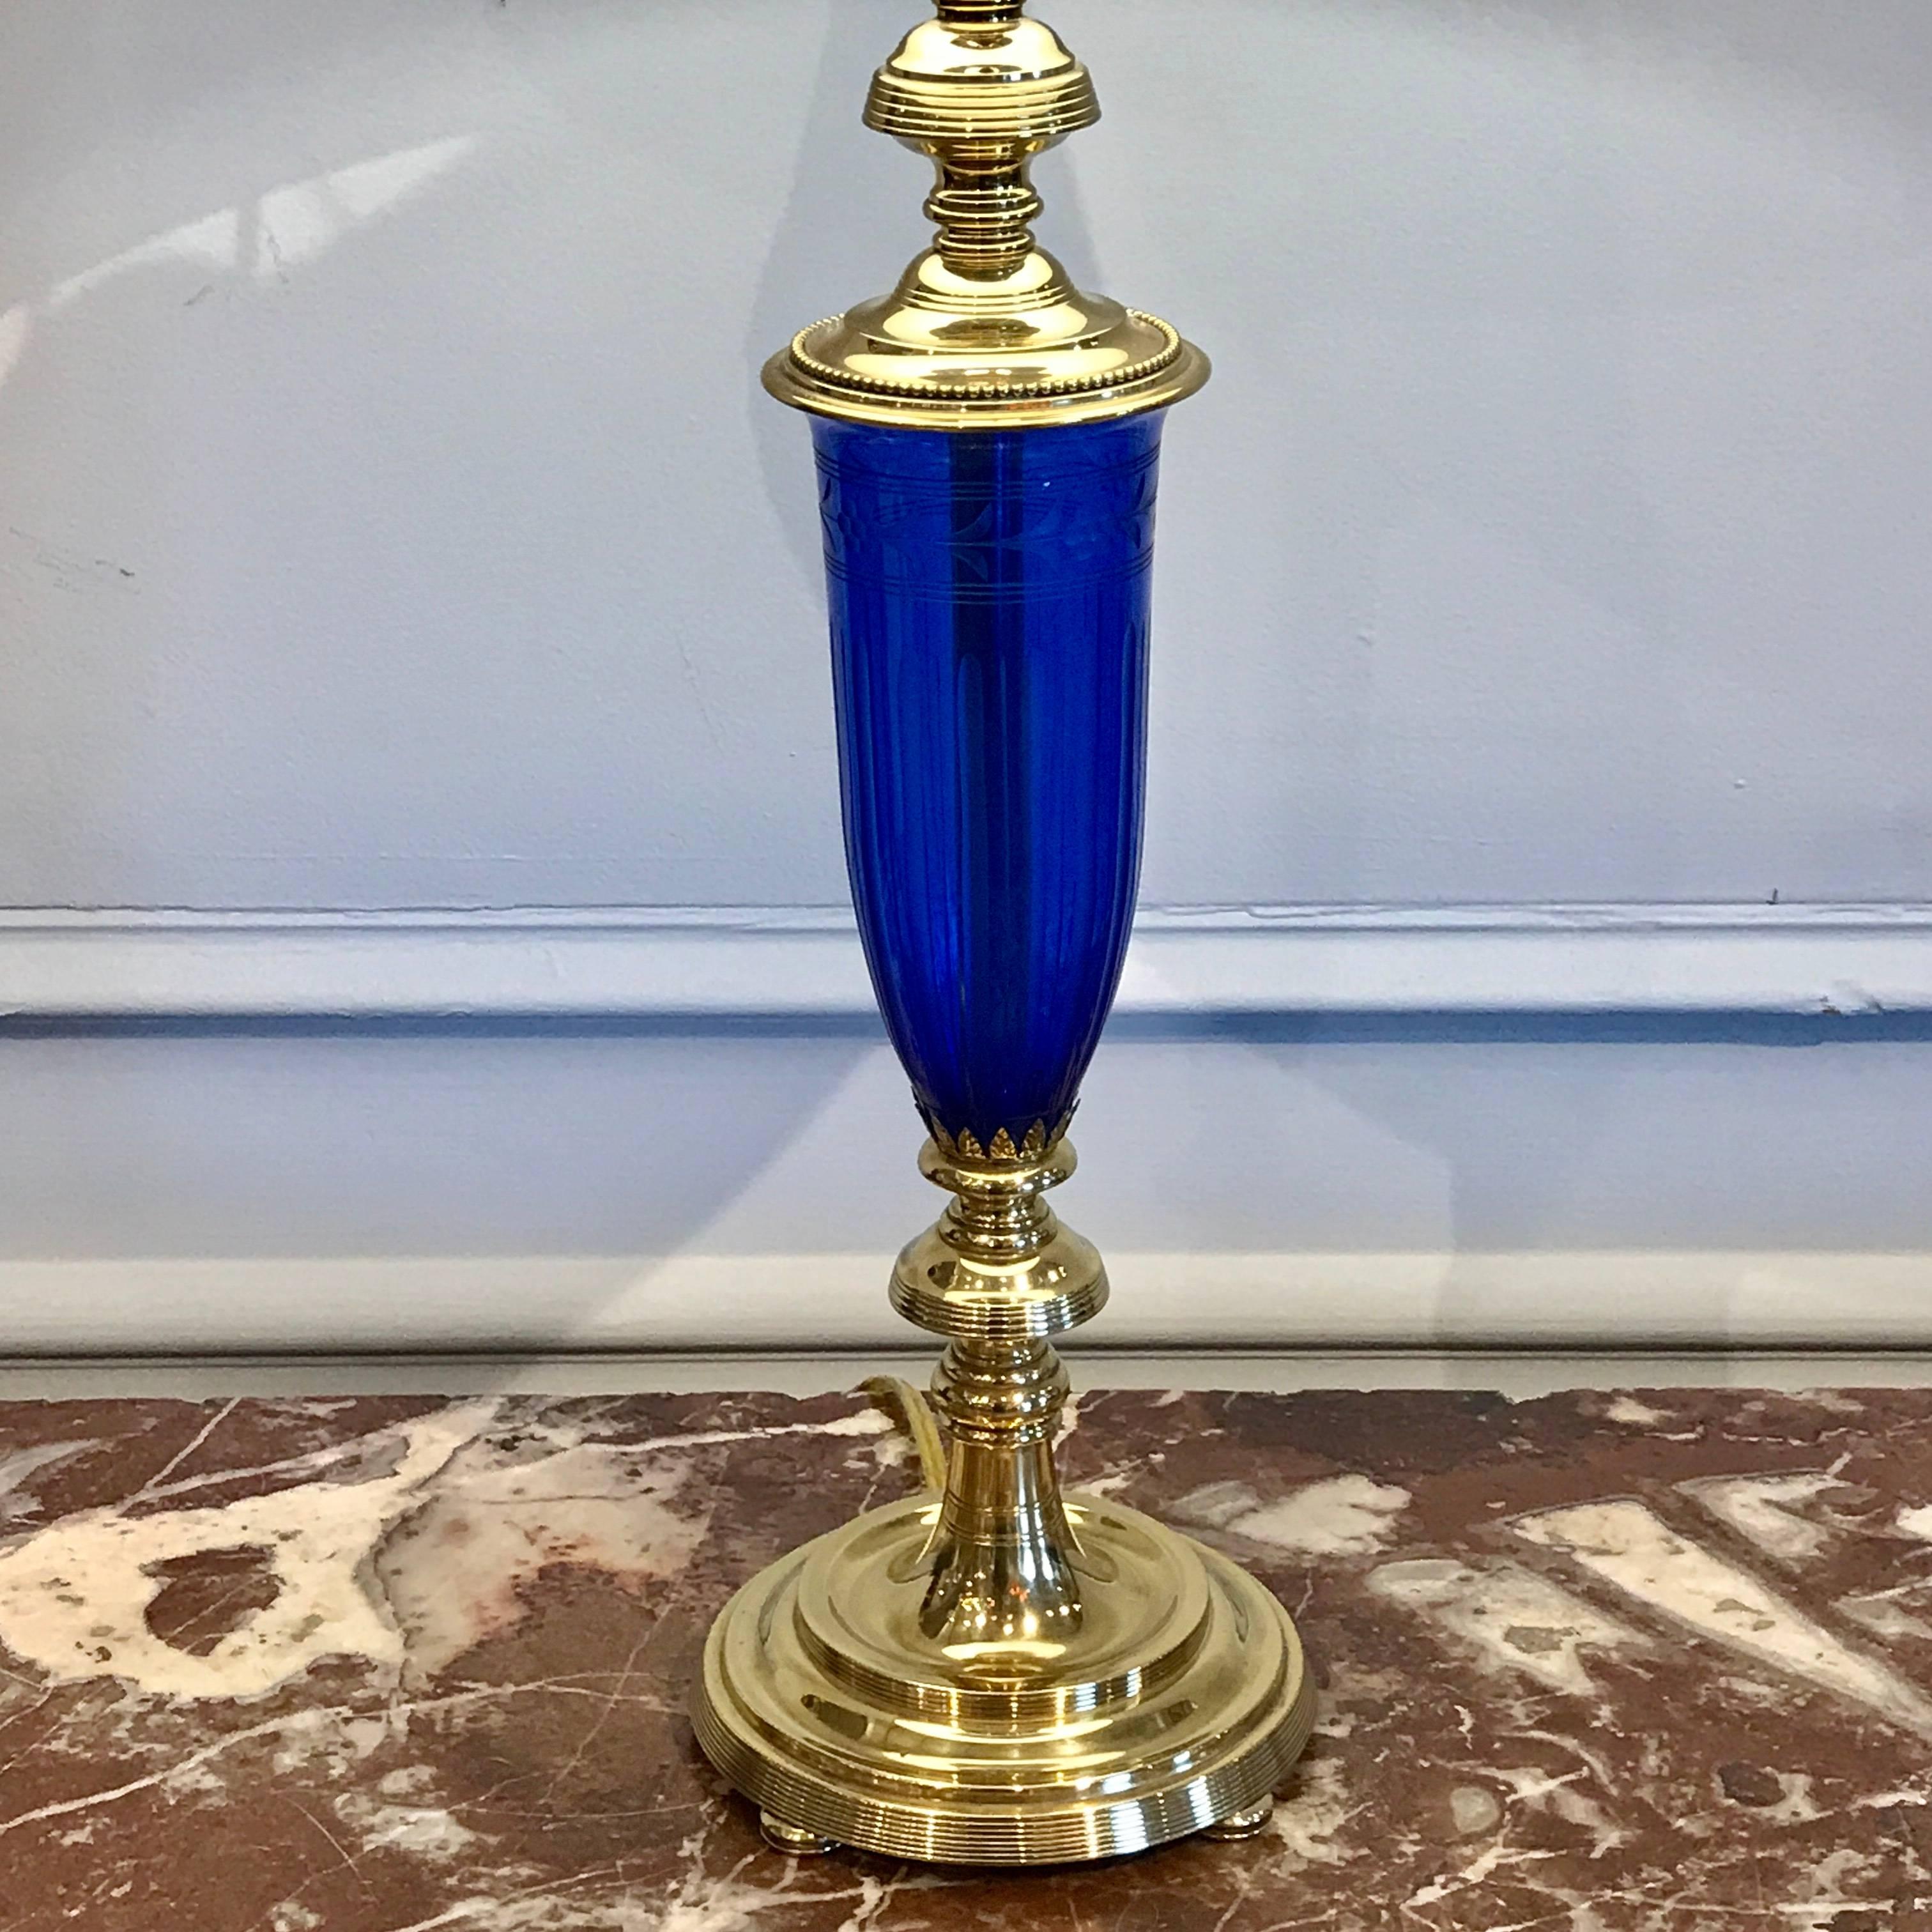 Engraved Pair of Cobalt Blue and Brass-Mounted Urn Lamps by Pairpoint